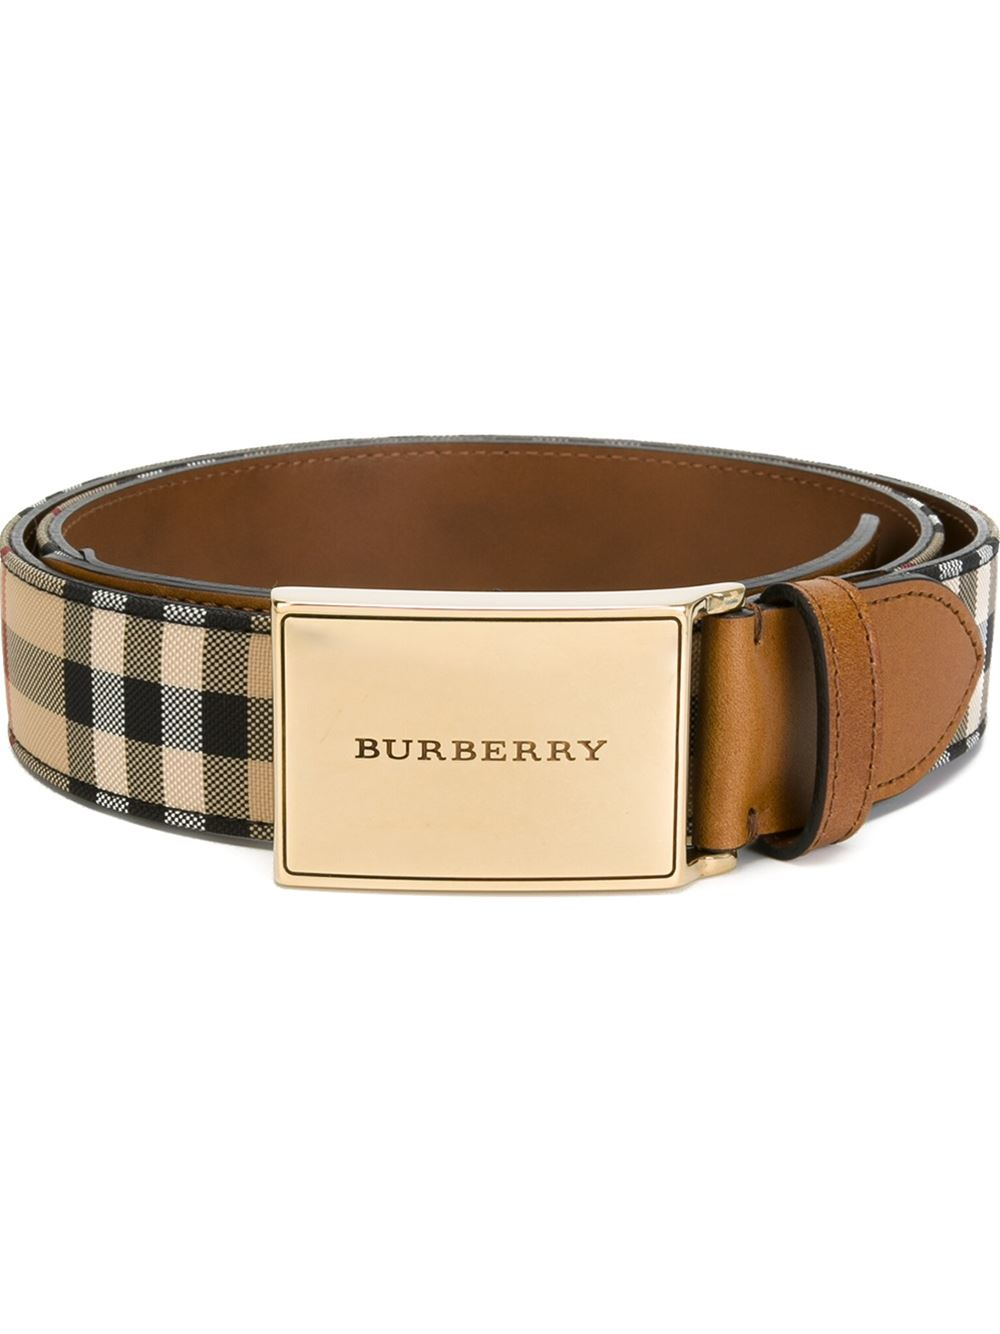 Burberry Leather Horseferry Check Belt 